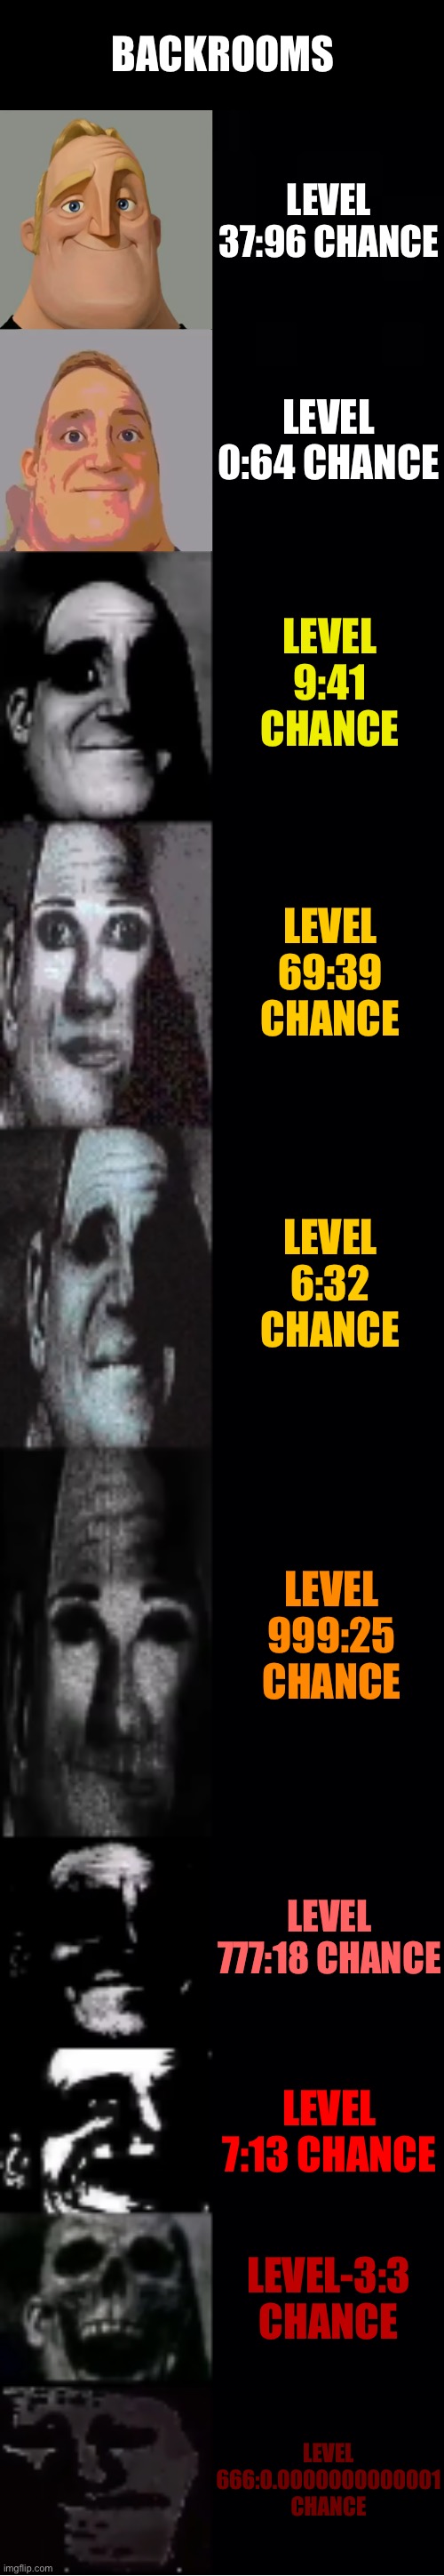 Never go to level 666 or else - Imgflip